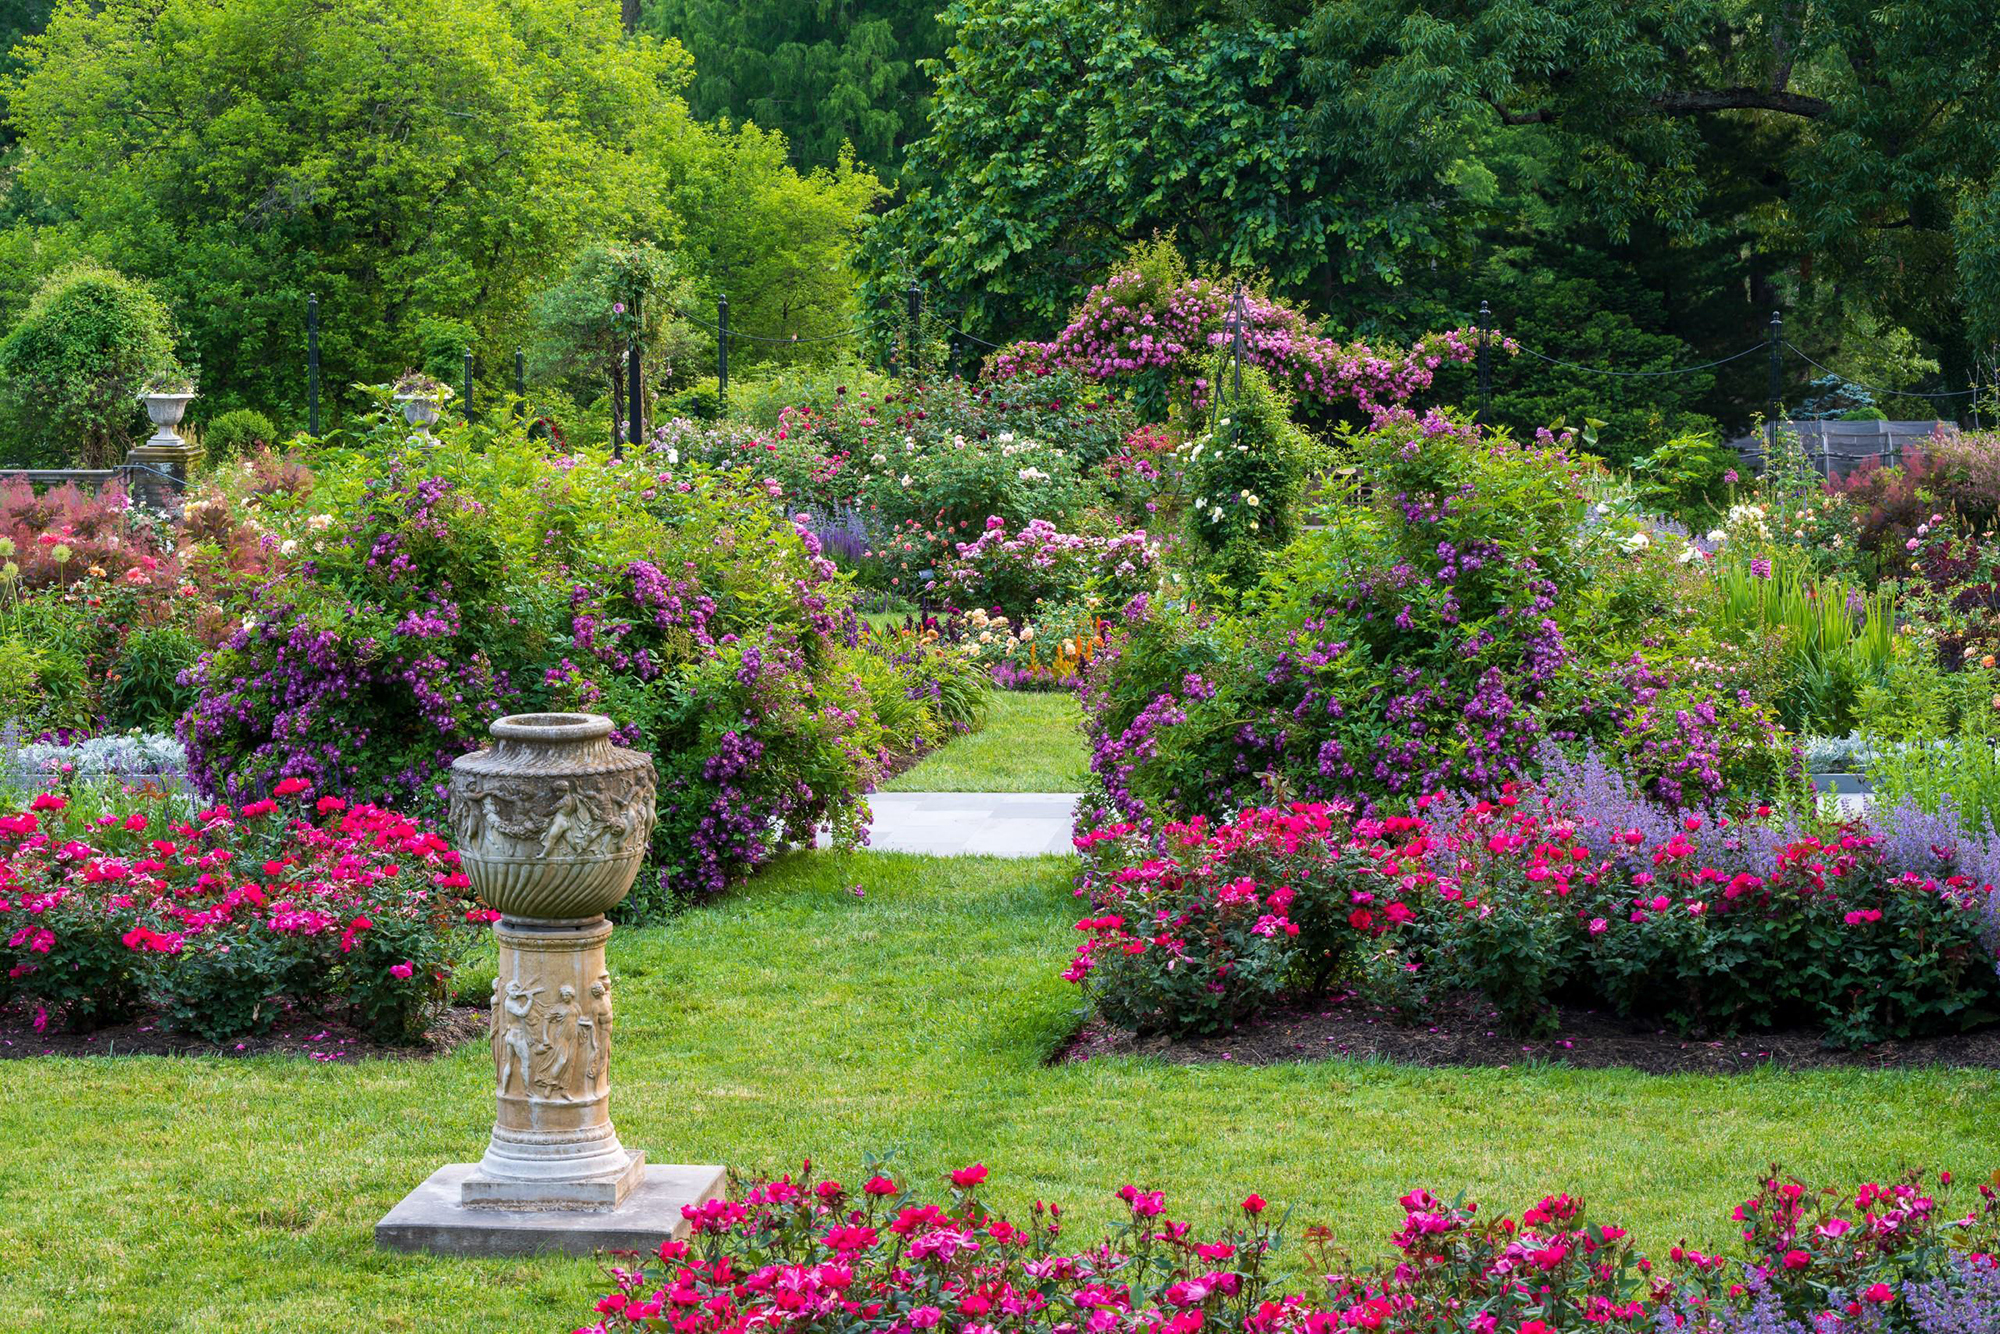 Rose garden view with ornamental planters.